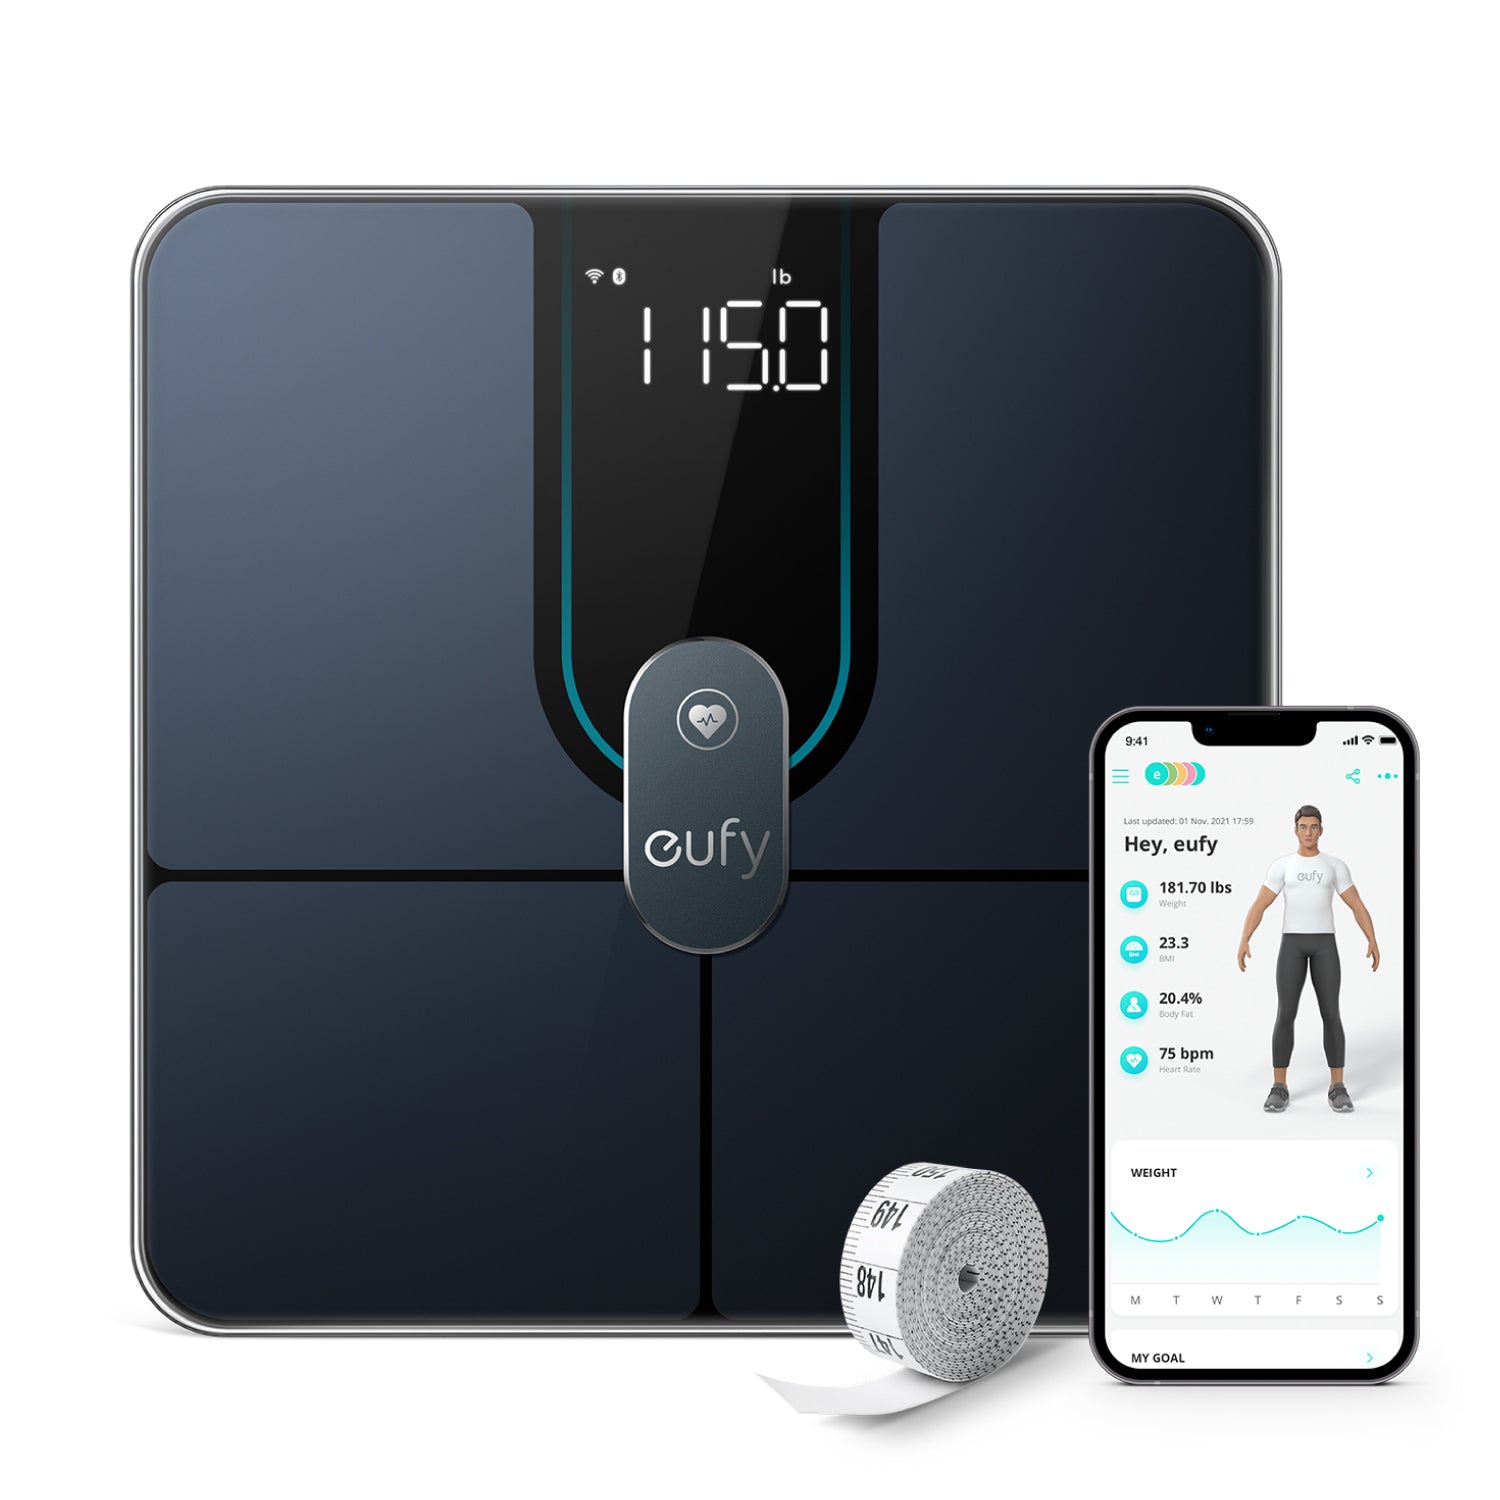 BODY COMPOSITION MONITOR - Monitor your health and Lifestyle regularly